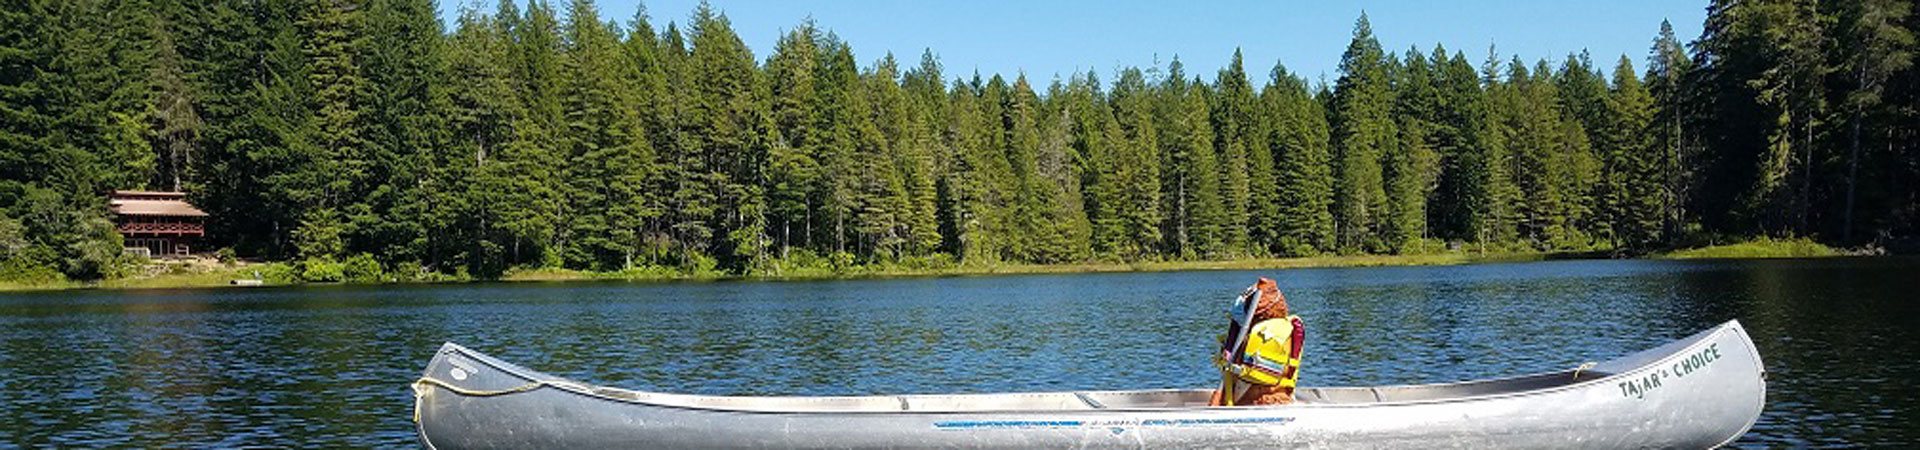  Image Description: A photo of a canoe on a lake with trees in the background.  